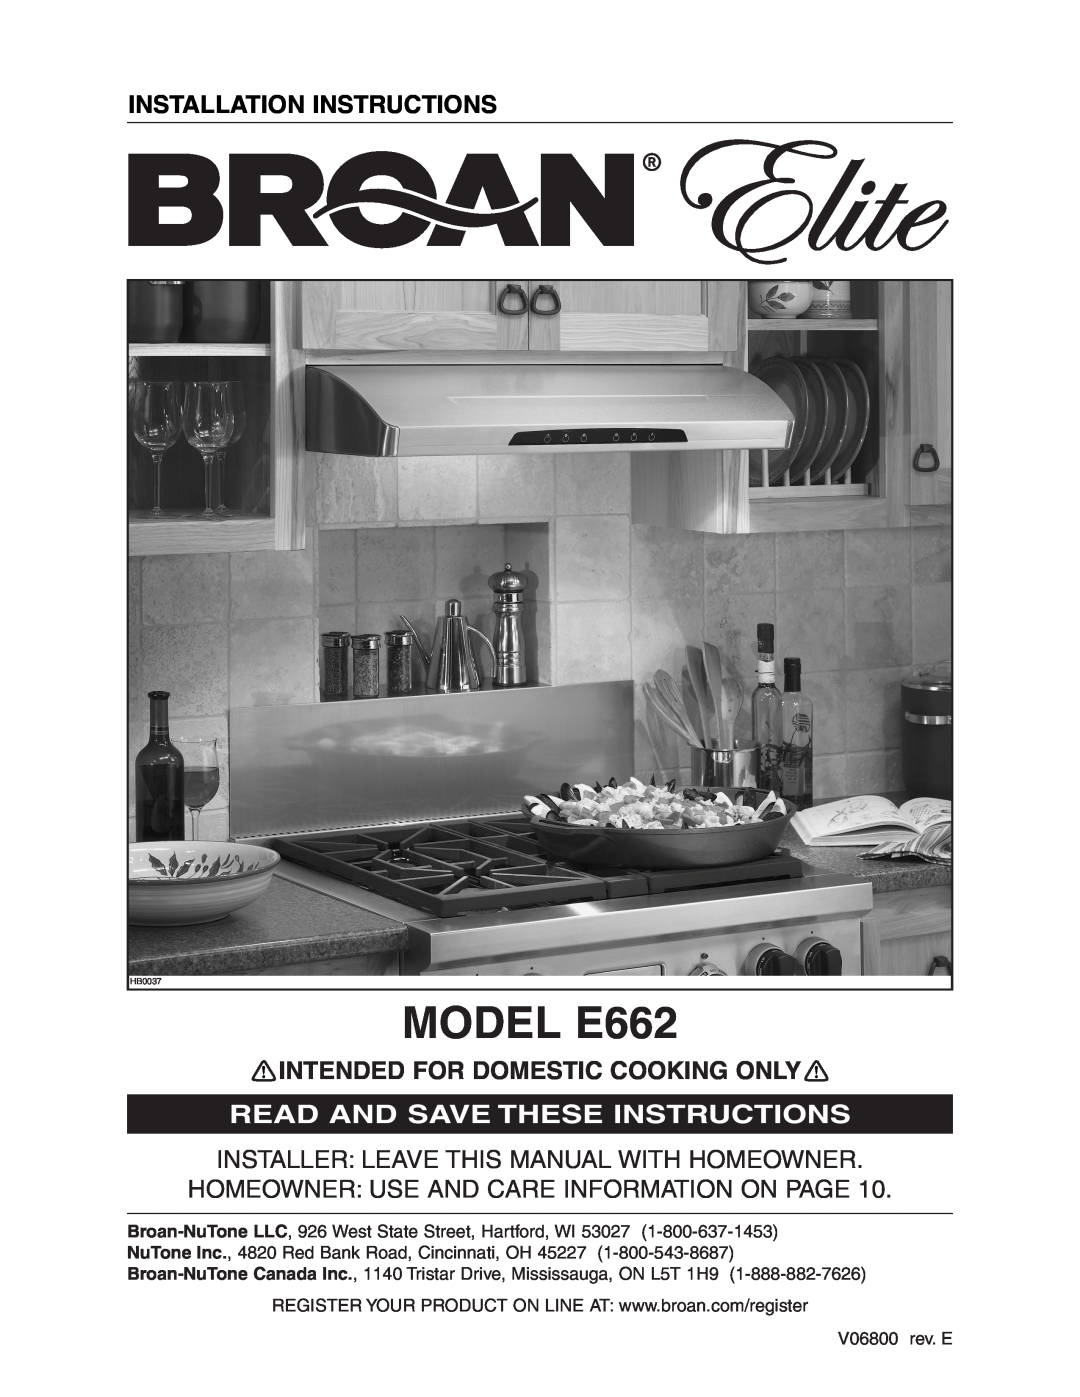 Broan Model E662 installation instructions MODEL E662, Installation Instructions, Intended For Domestic Cooking Only 